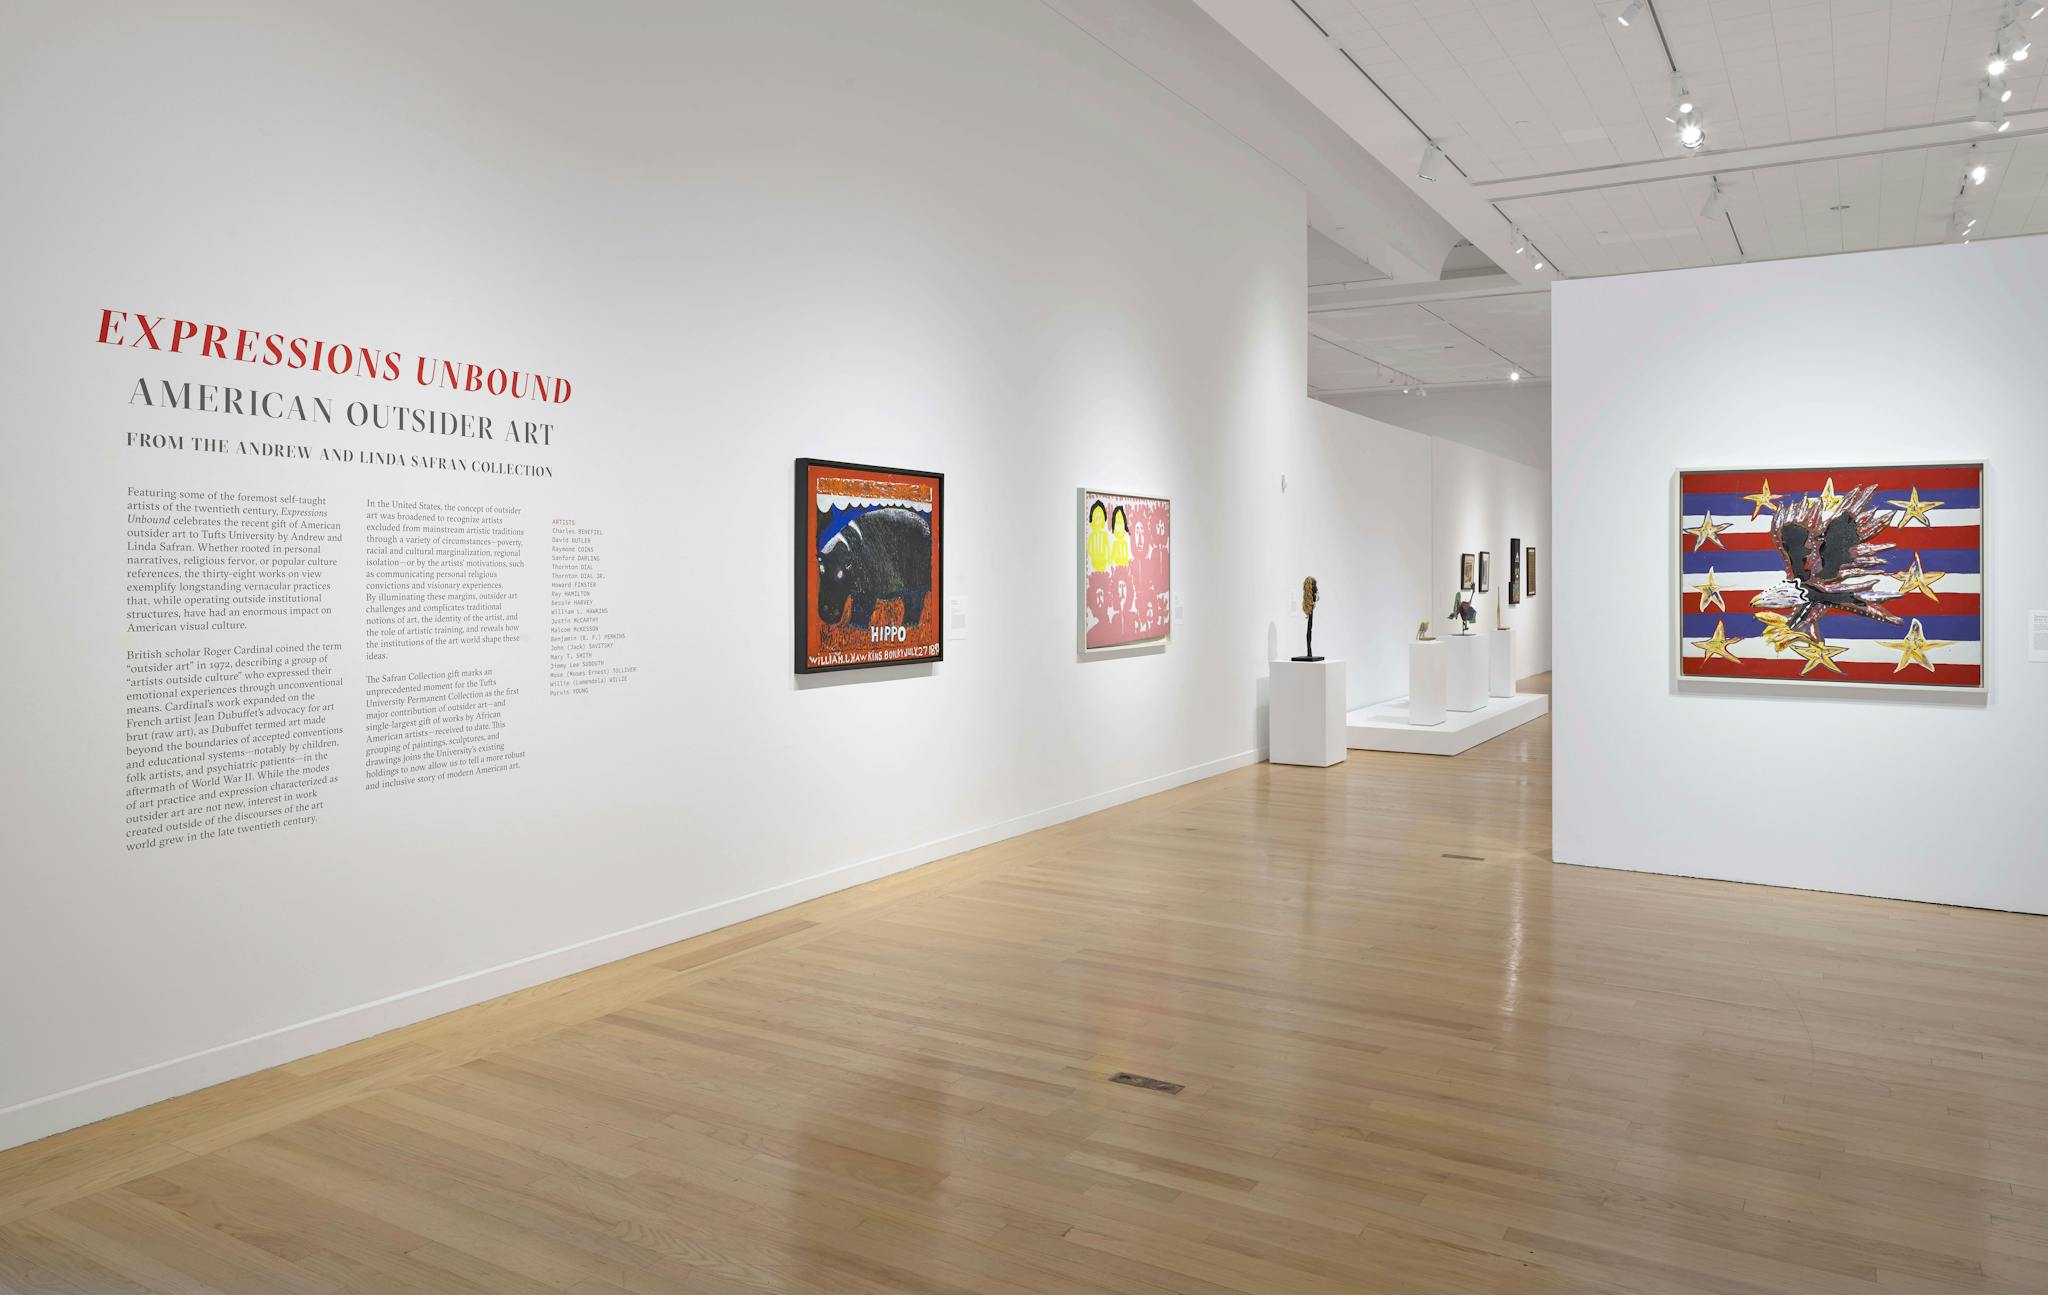 Works of American outsider art, such as one displaying the image of an eagle set against red, white, and blue stripes, appear on the walls of the gallery space.